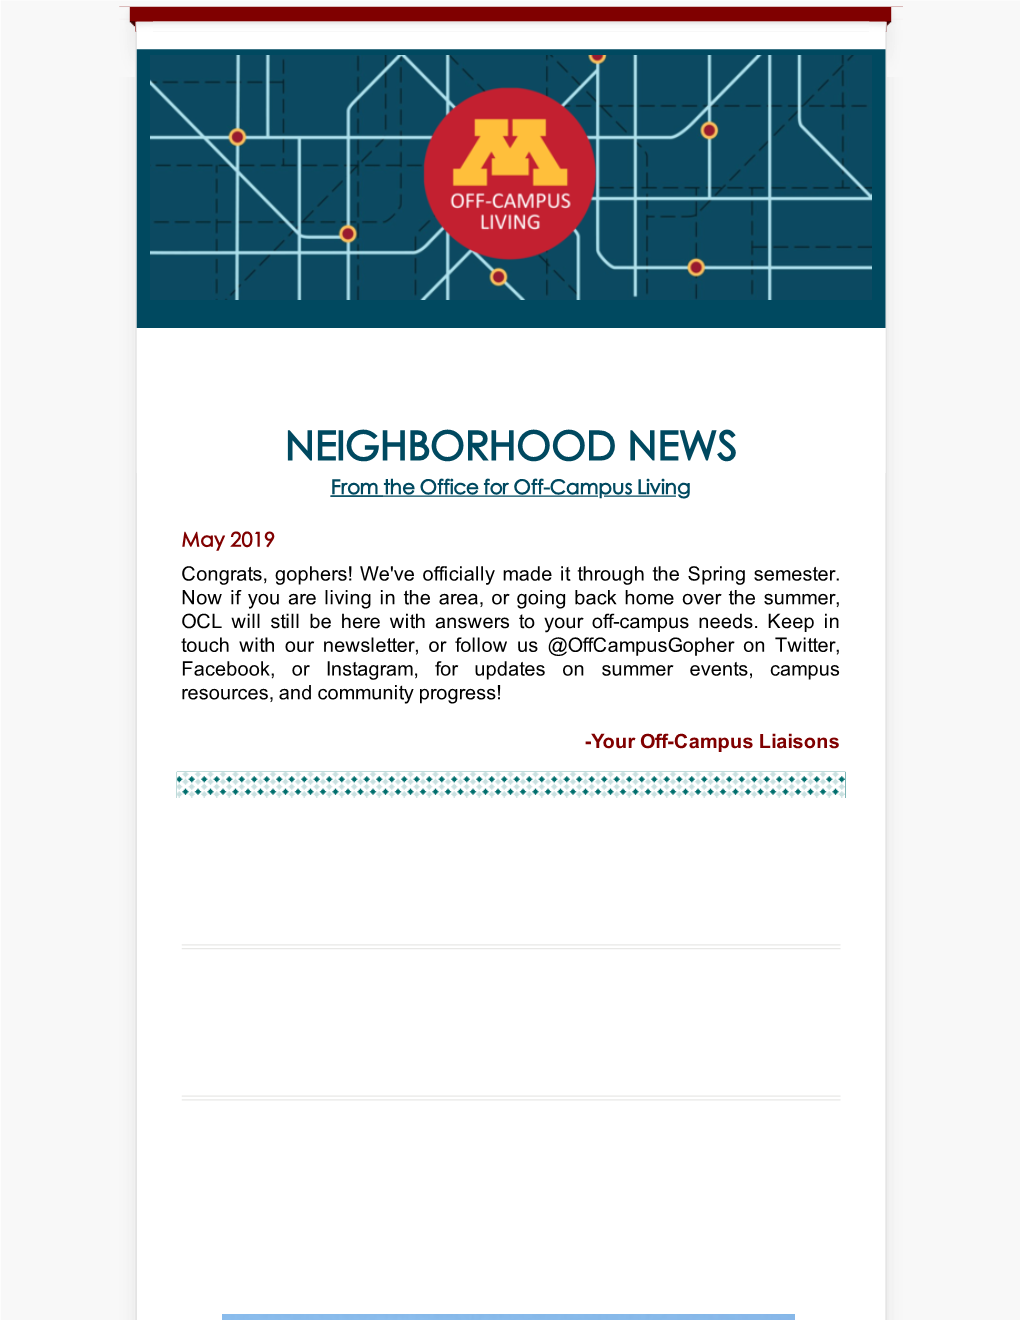 NEIGHBORHOOD NEWS from the Office for Off-Campus Living